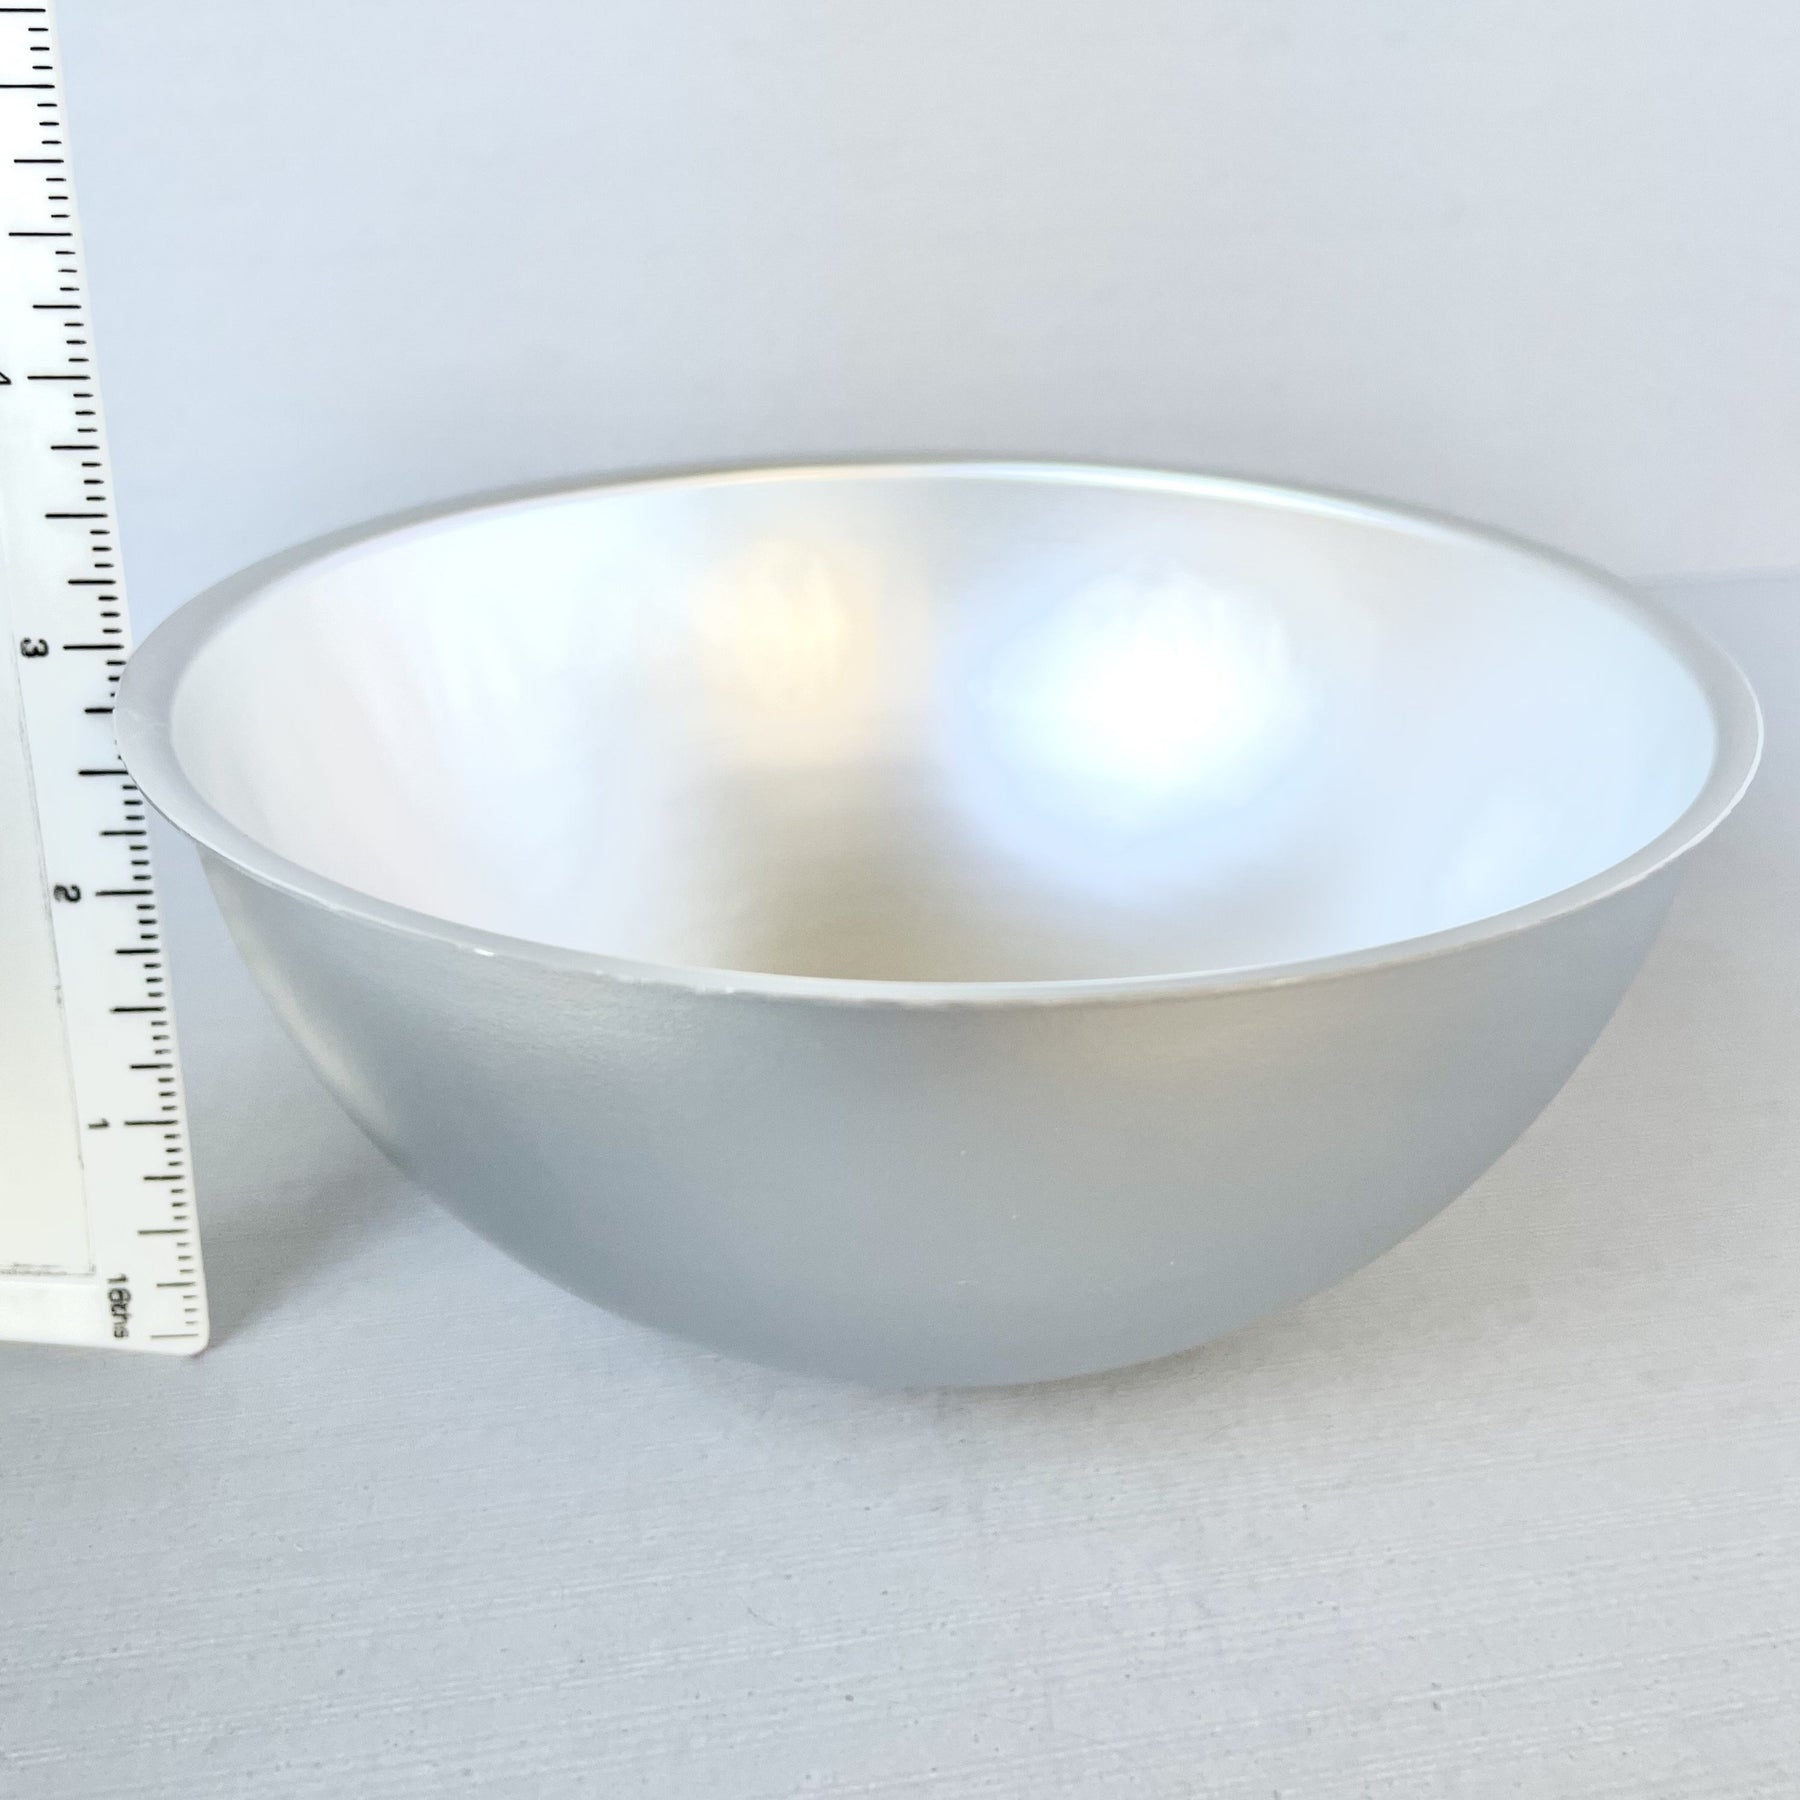 6" Dome Cake Pans (2)